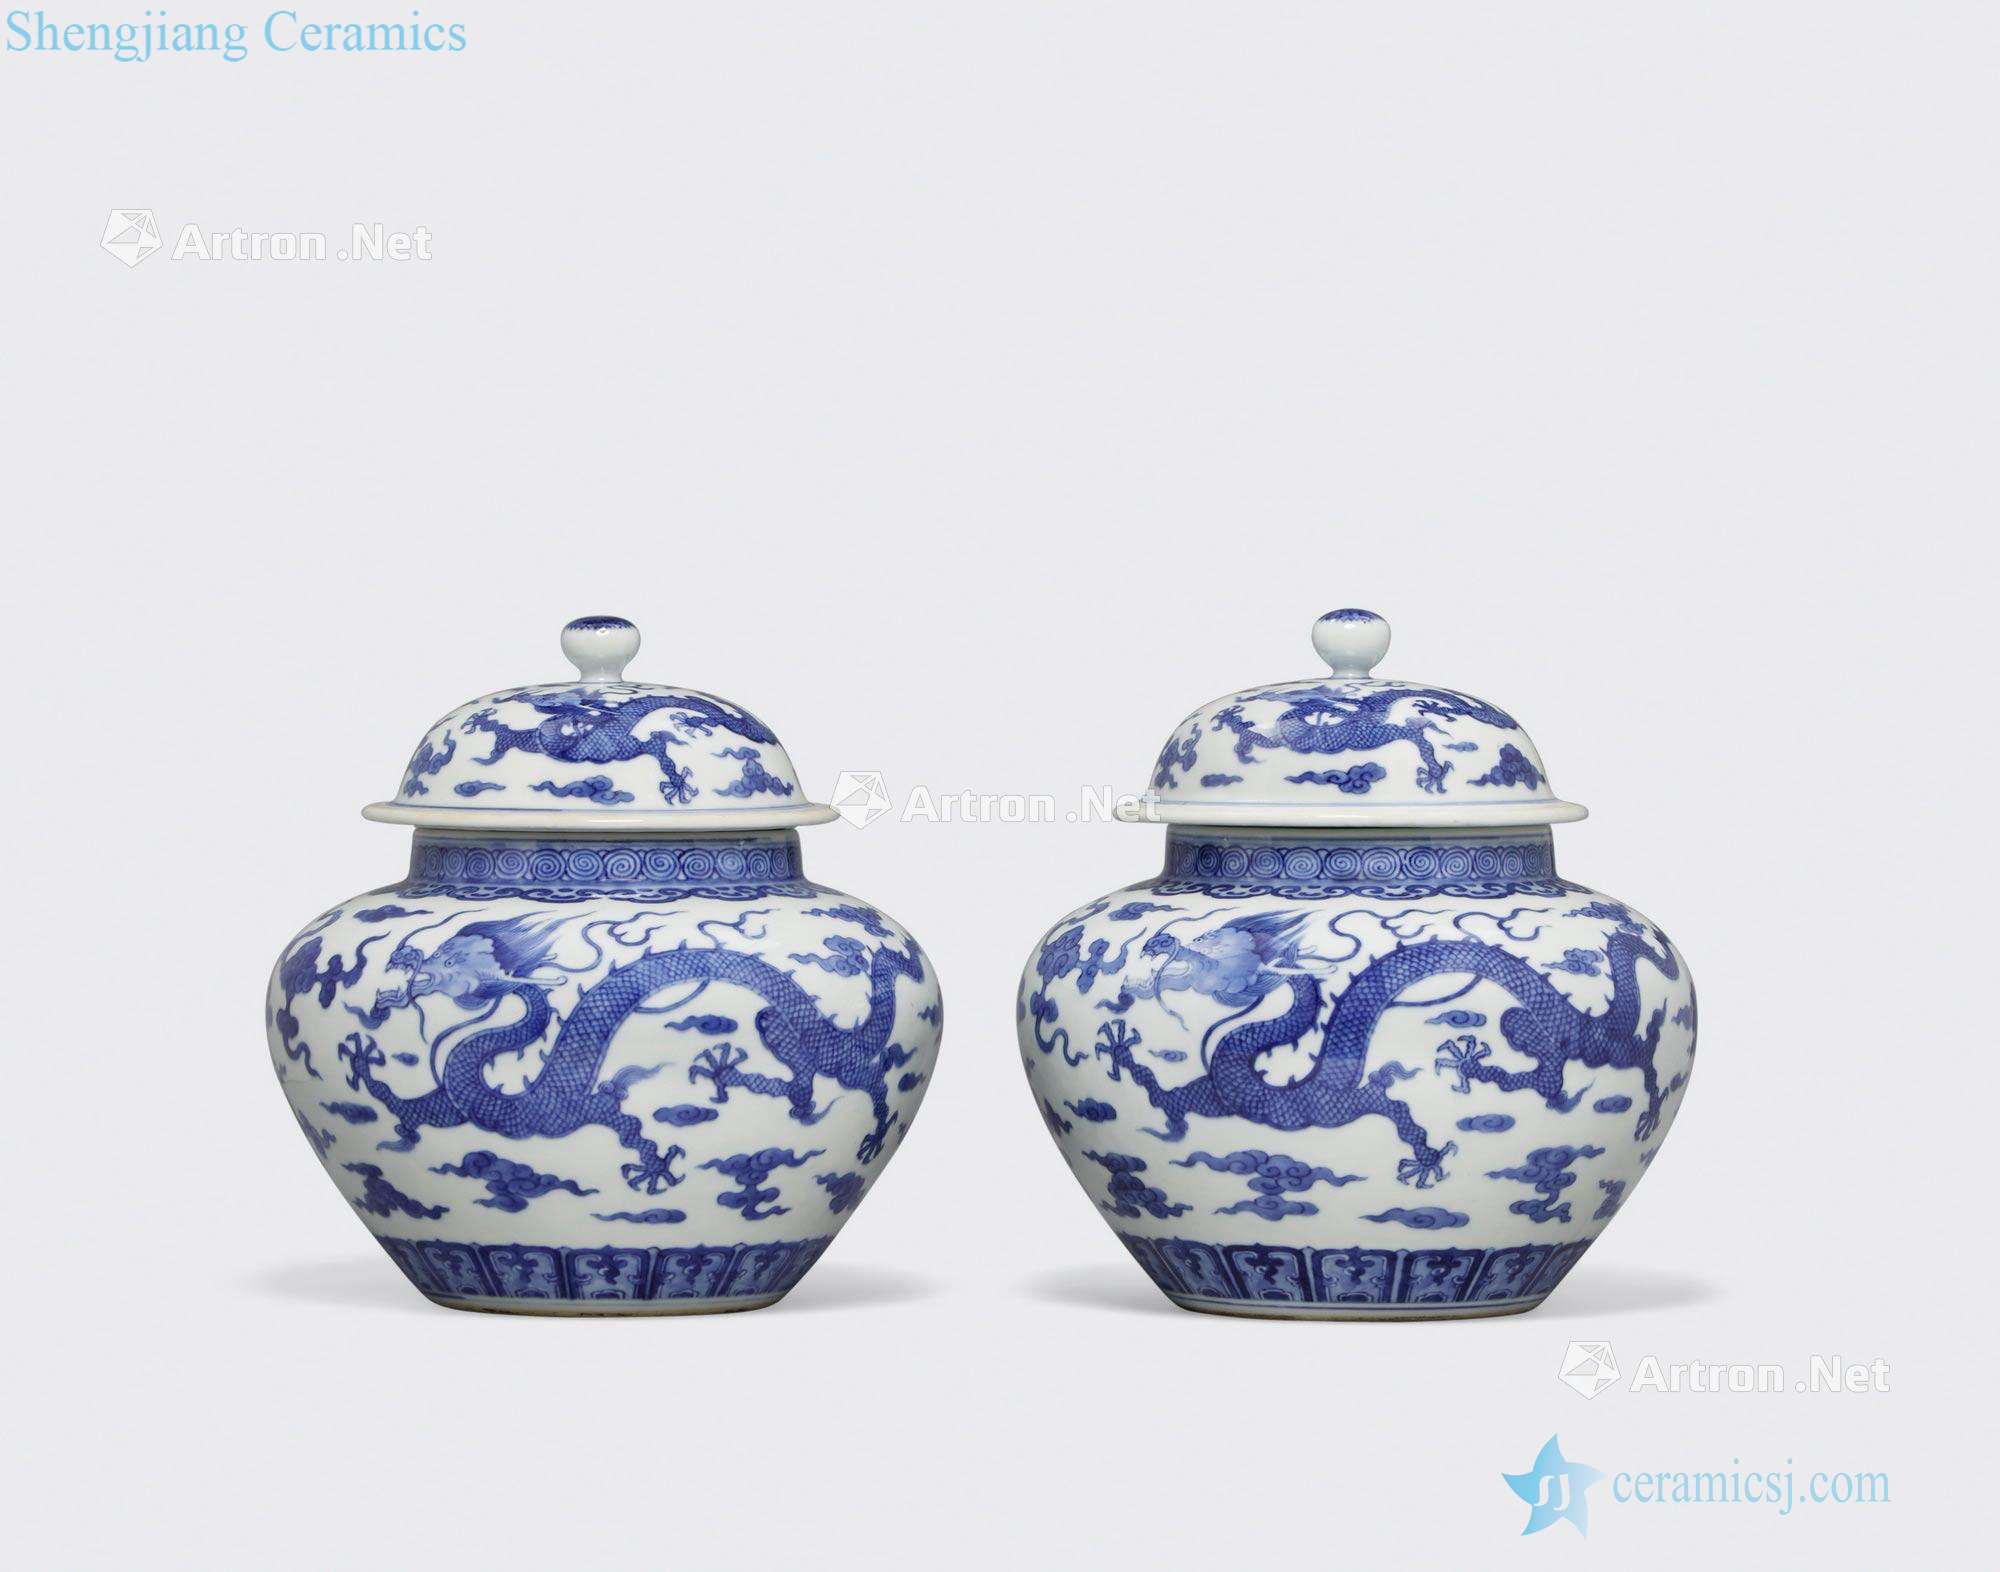 Jiajing marks, newest the Qing dynasty A PAIR OF BLUE AND WHITE "DRAGON" JARS AND COVERS